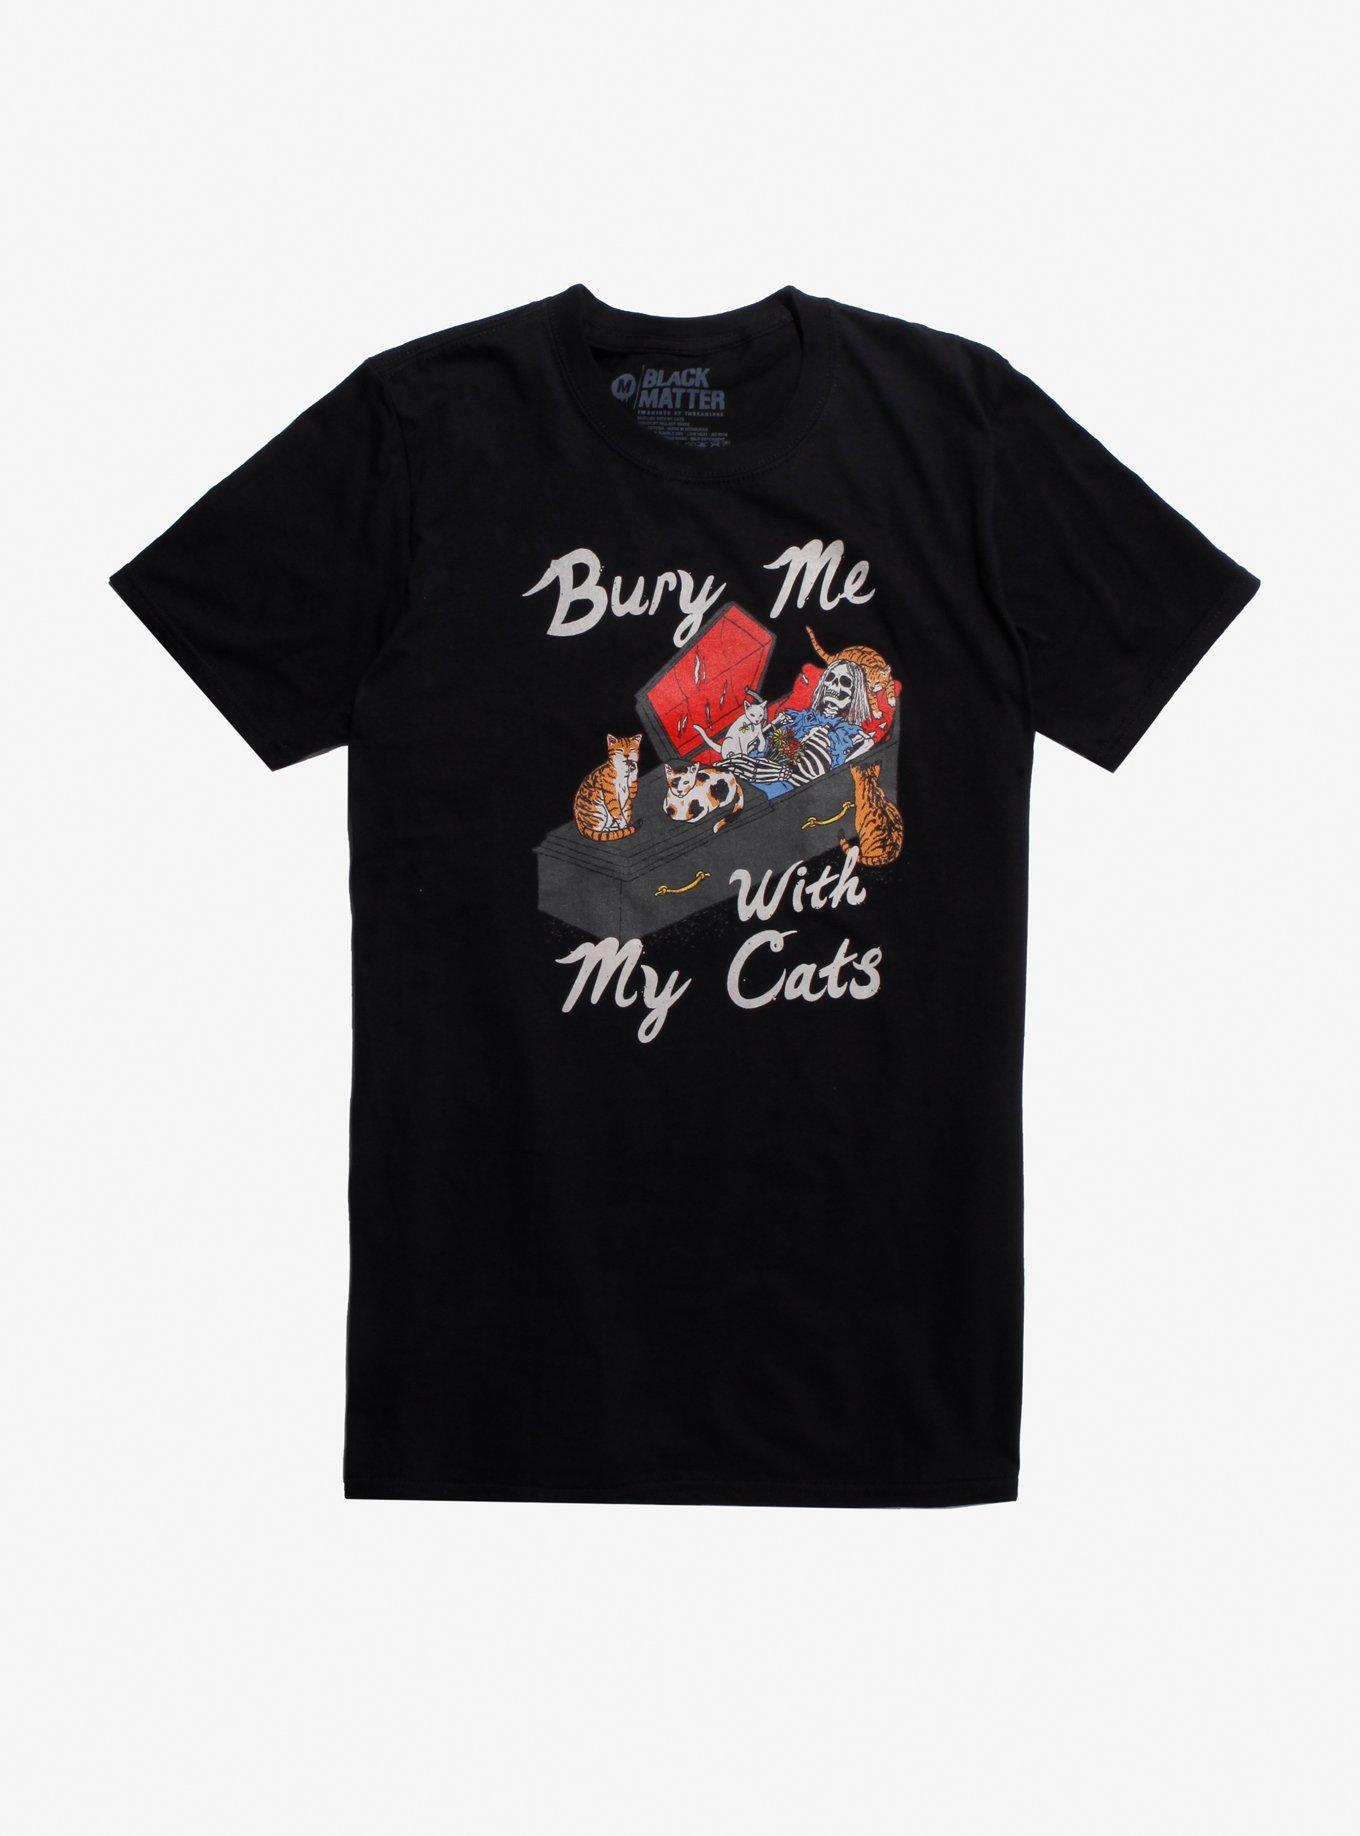 Bury Me With My Cats T-Shirt By Hillary White, BLACK, hi-res